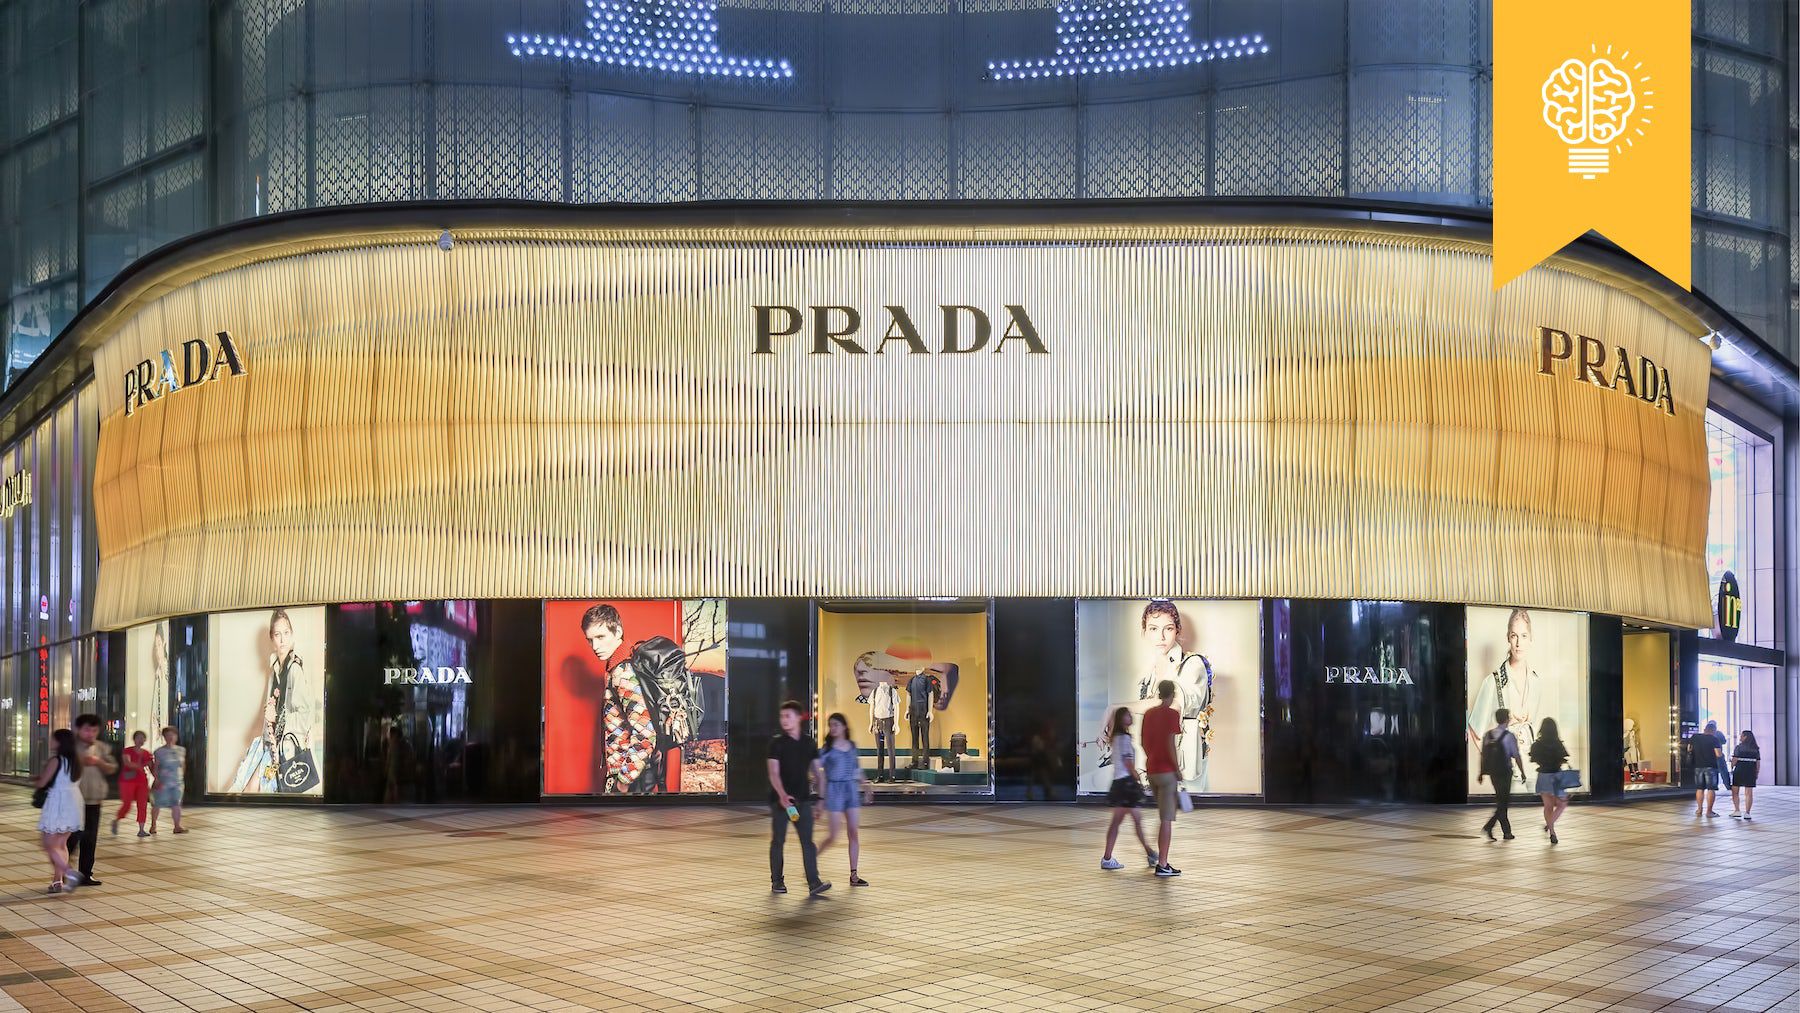 Prada Aims to Hire Over 400 Workers in Italy This Year